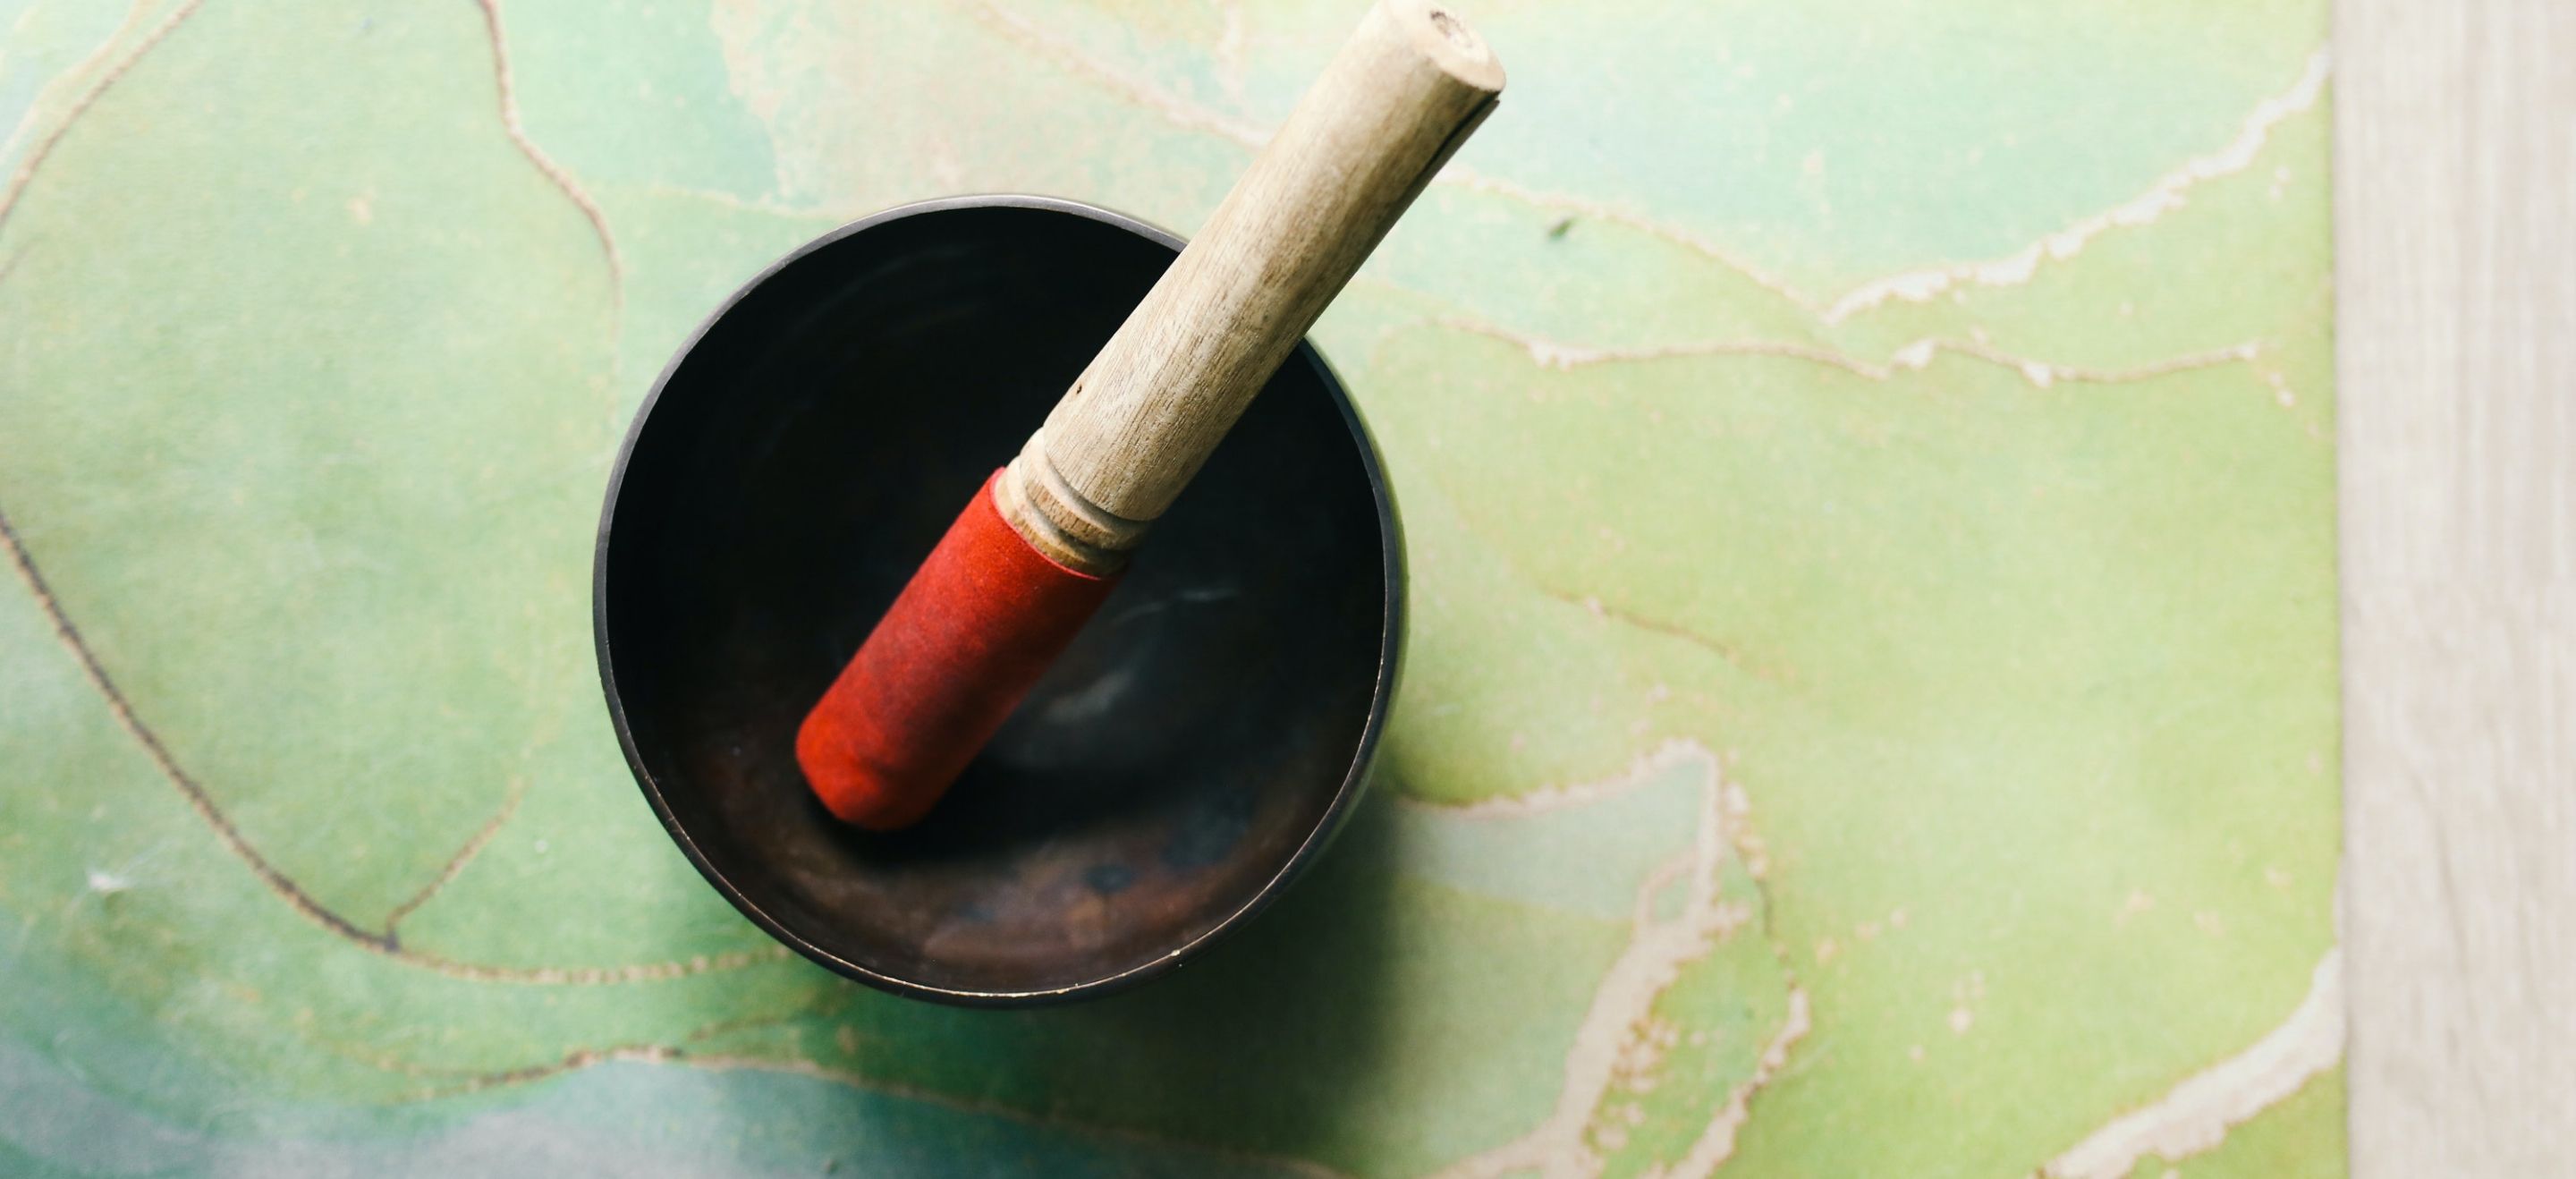 Singing bowl with mallet with red tip on a green and blue marble surface